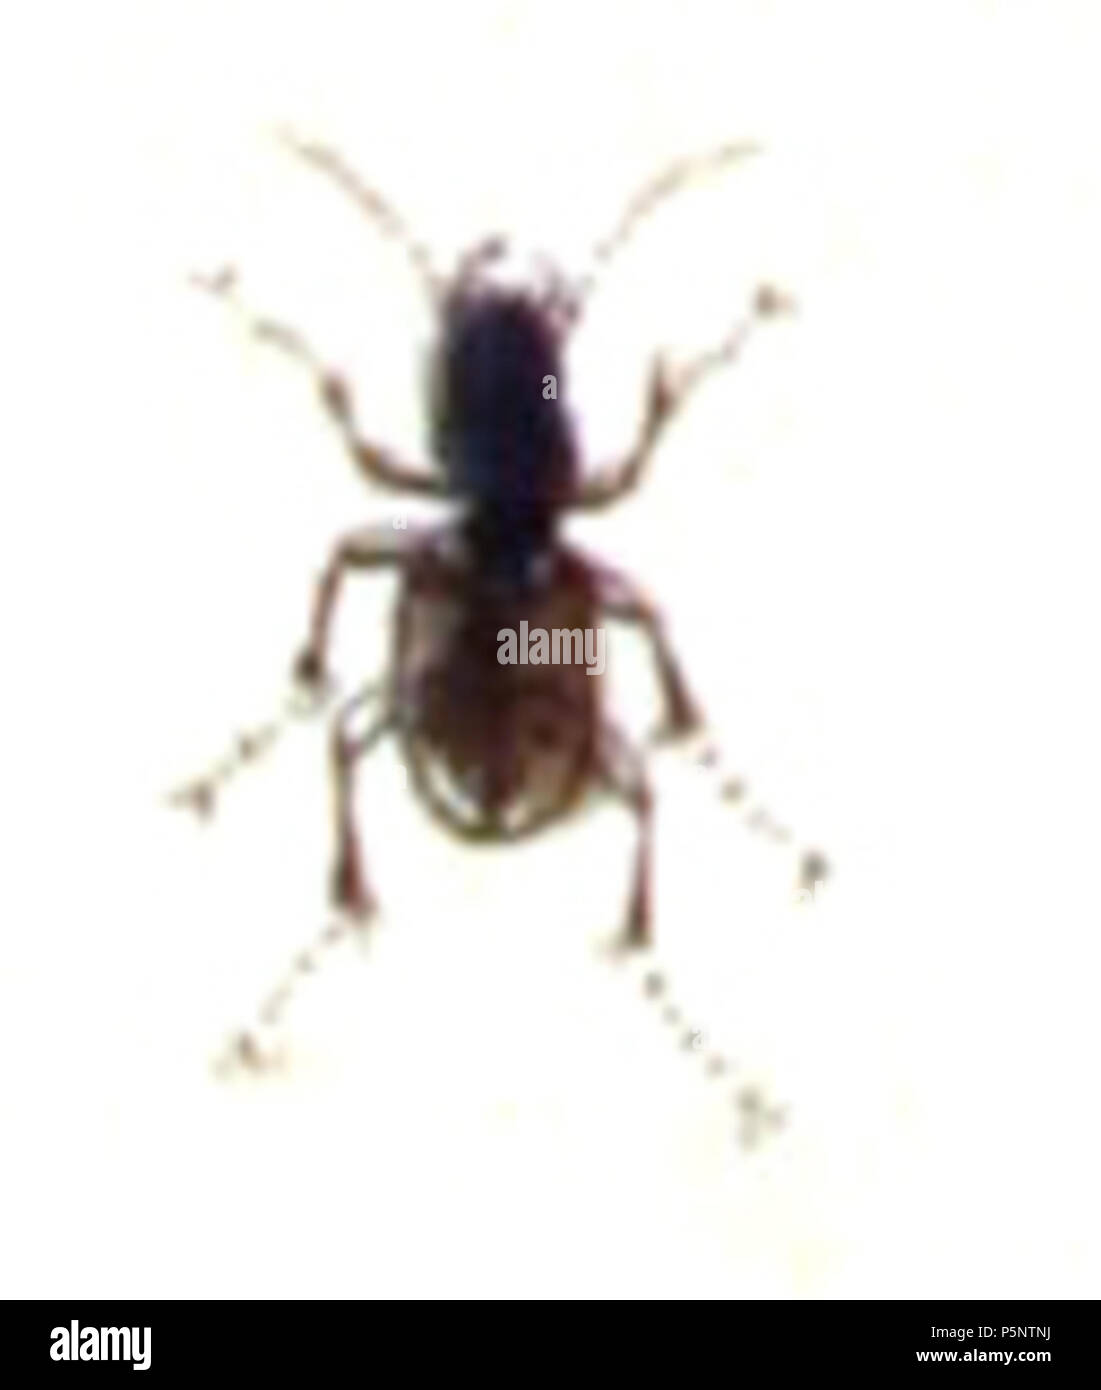 N/A. Notaphus varium = Bembidion varium, from Calwer's Käferbuch, Table 6, Picture 30. Taxonomy was updated to 2008, using mostly the sites Fauna Europaea and BioLib. Please contact Sarefo if the determination is wrong! . 1876. Book by   Carl Gustav Calwer  (1821–1874)    Description German ornithologist and entomologist  Date of birth/death 11 November 1821 19 August 1874  Location of birth/death Stuttgart Mineralbad Berg  Authority control  : Q78413 VIAF:64757747 ISNI:0000 0001 0980 5321 GND:116432969 SUDOC:146603133 Koninklijke:07228000X      Gustav Jäger  (1832–1917)     Alternative names  Stock Photo